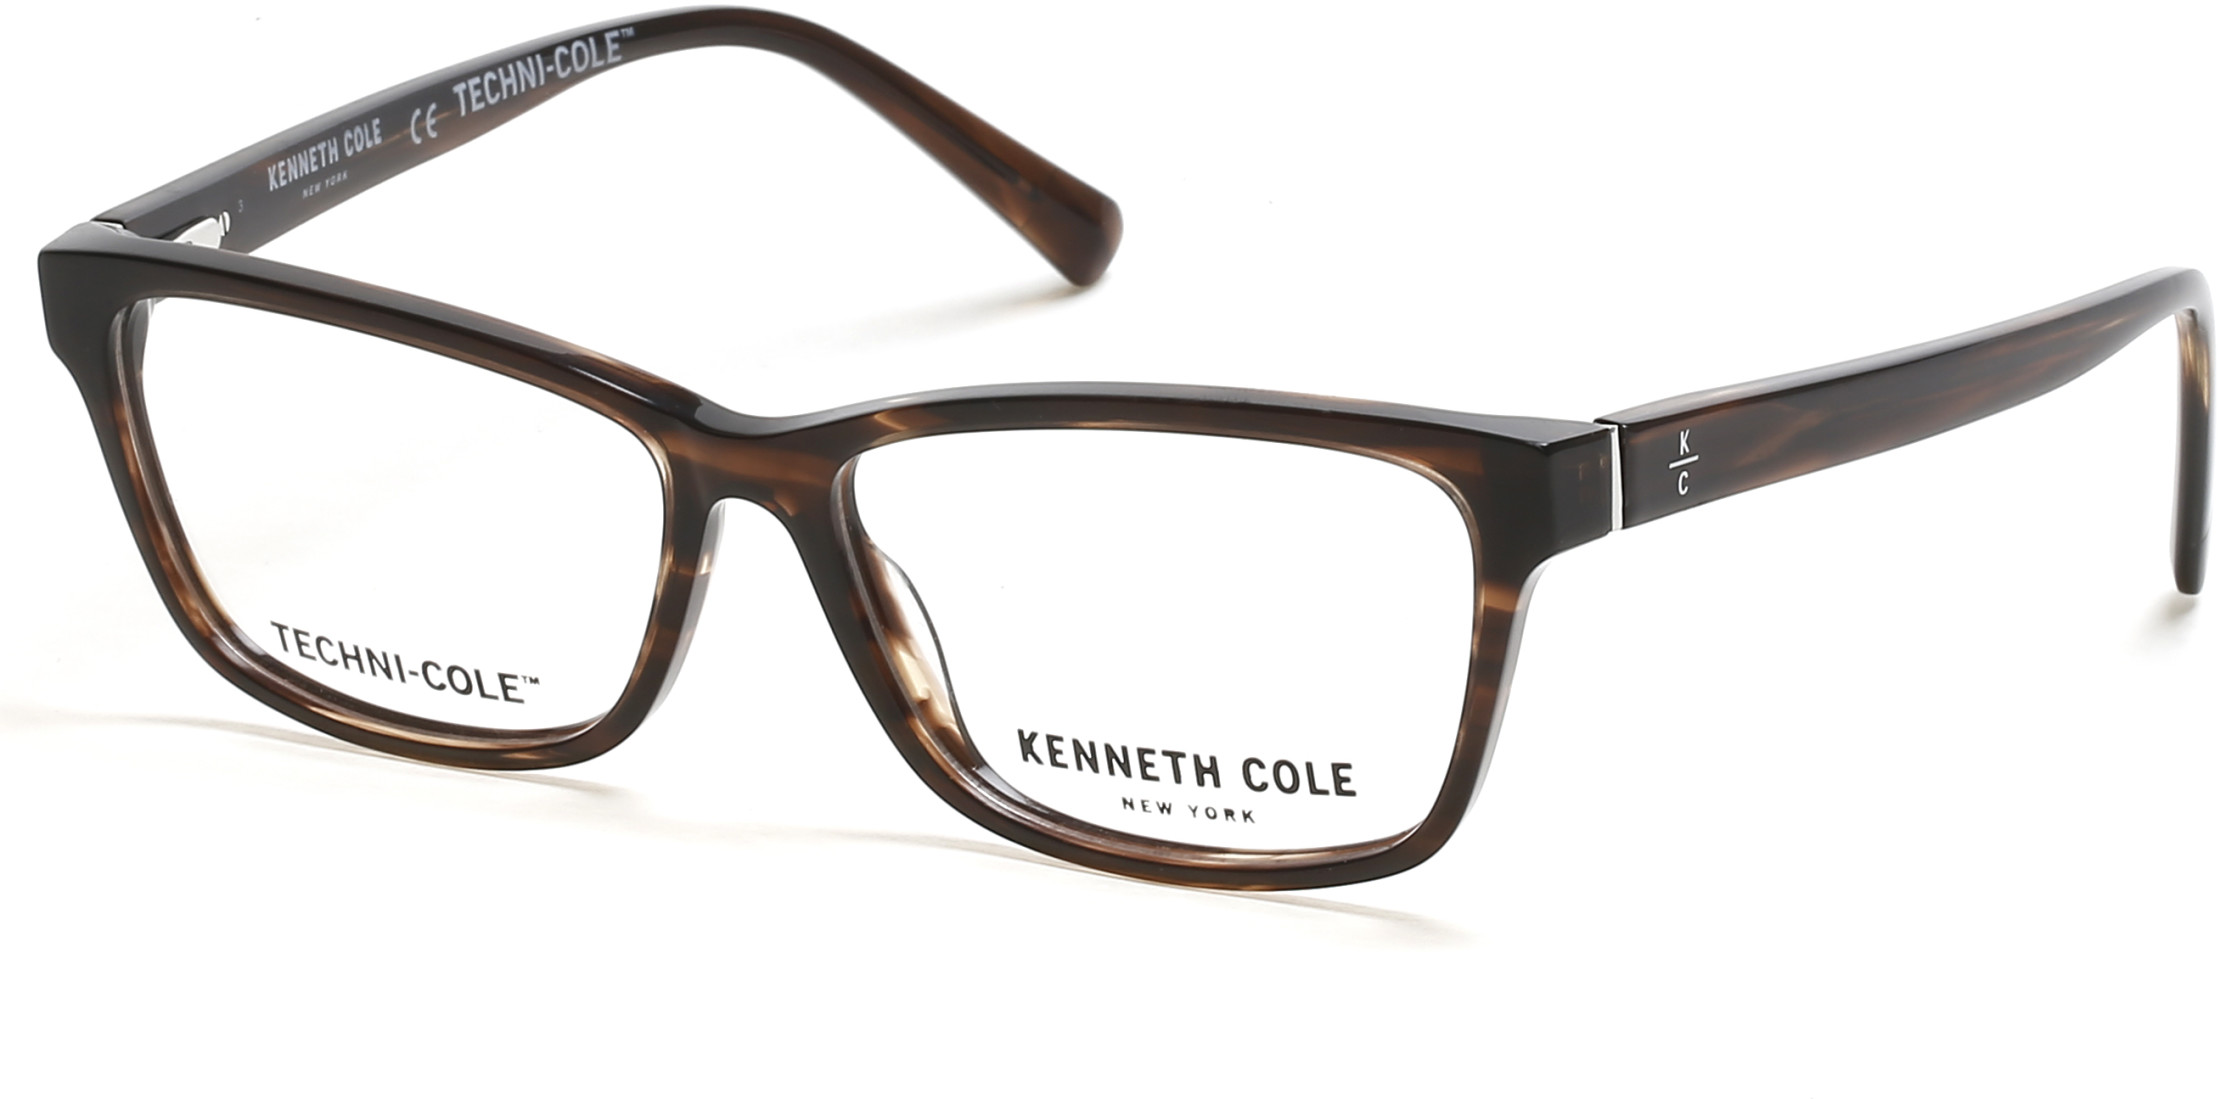 KENNETH COLE NY 0333 045